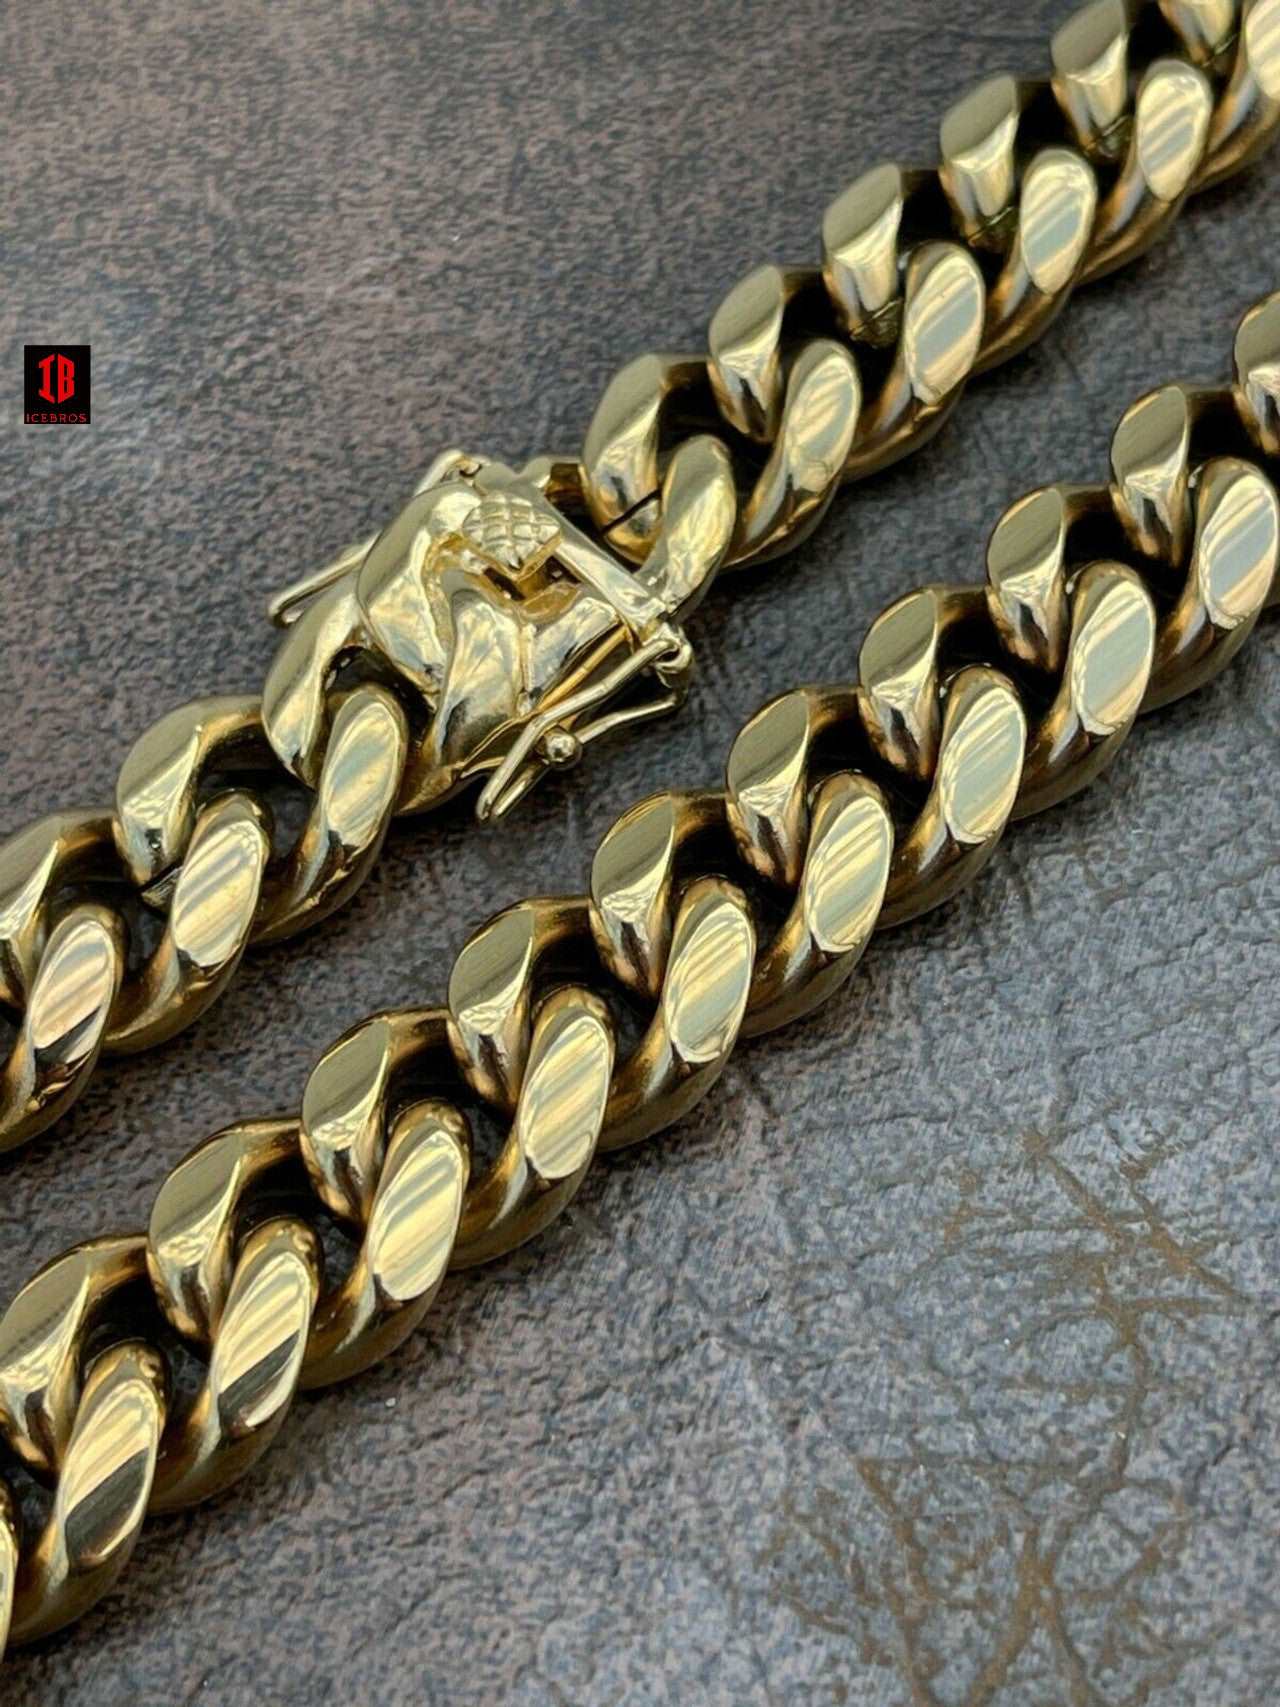 (14MM) Mens Miami Cuban Link Chain - Gold Plated Stainless Steel 8-18mm Yellow/Rose/White